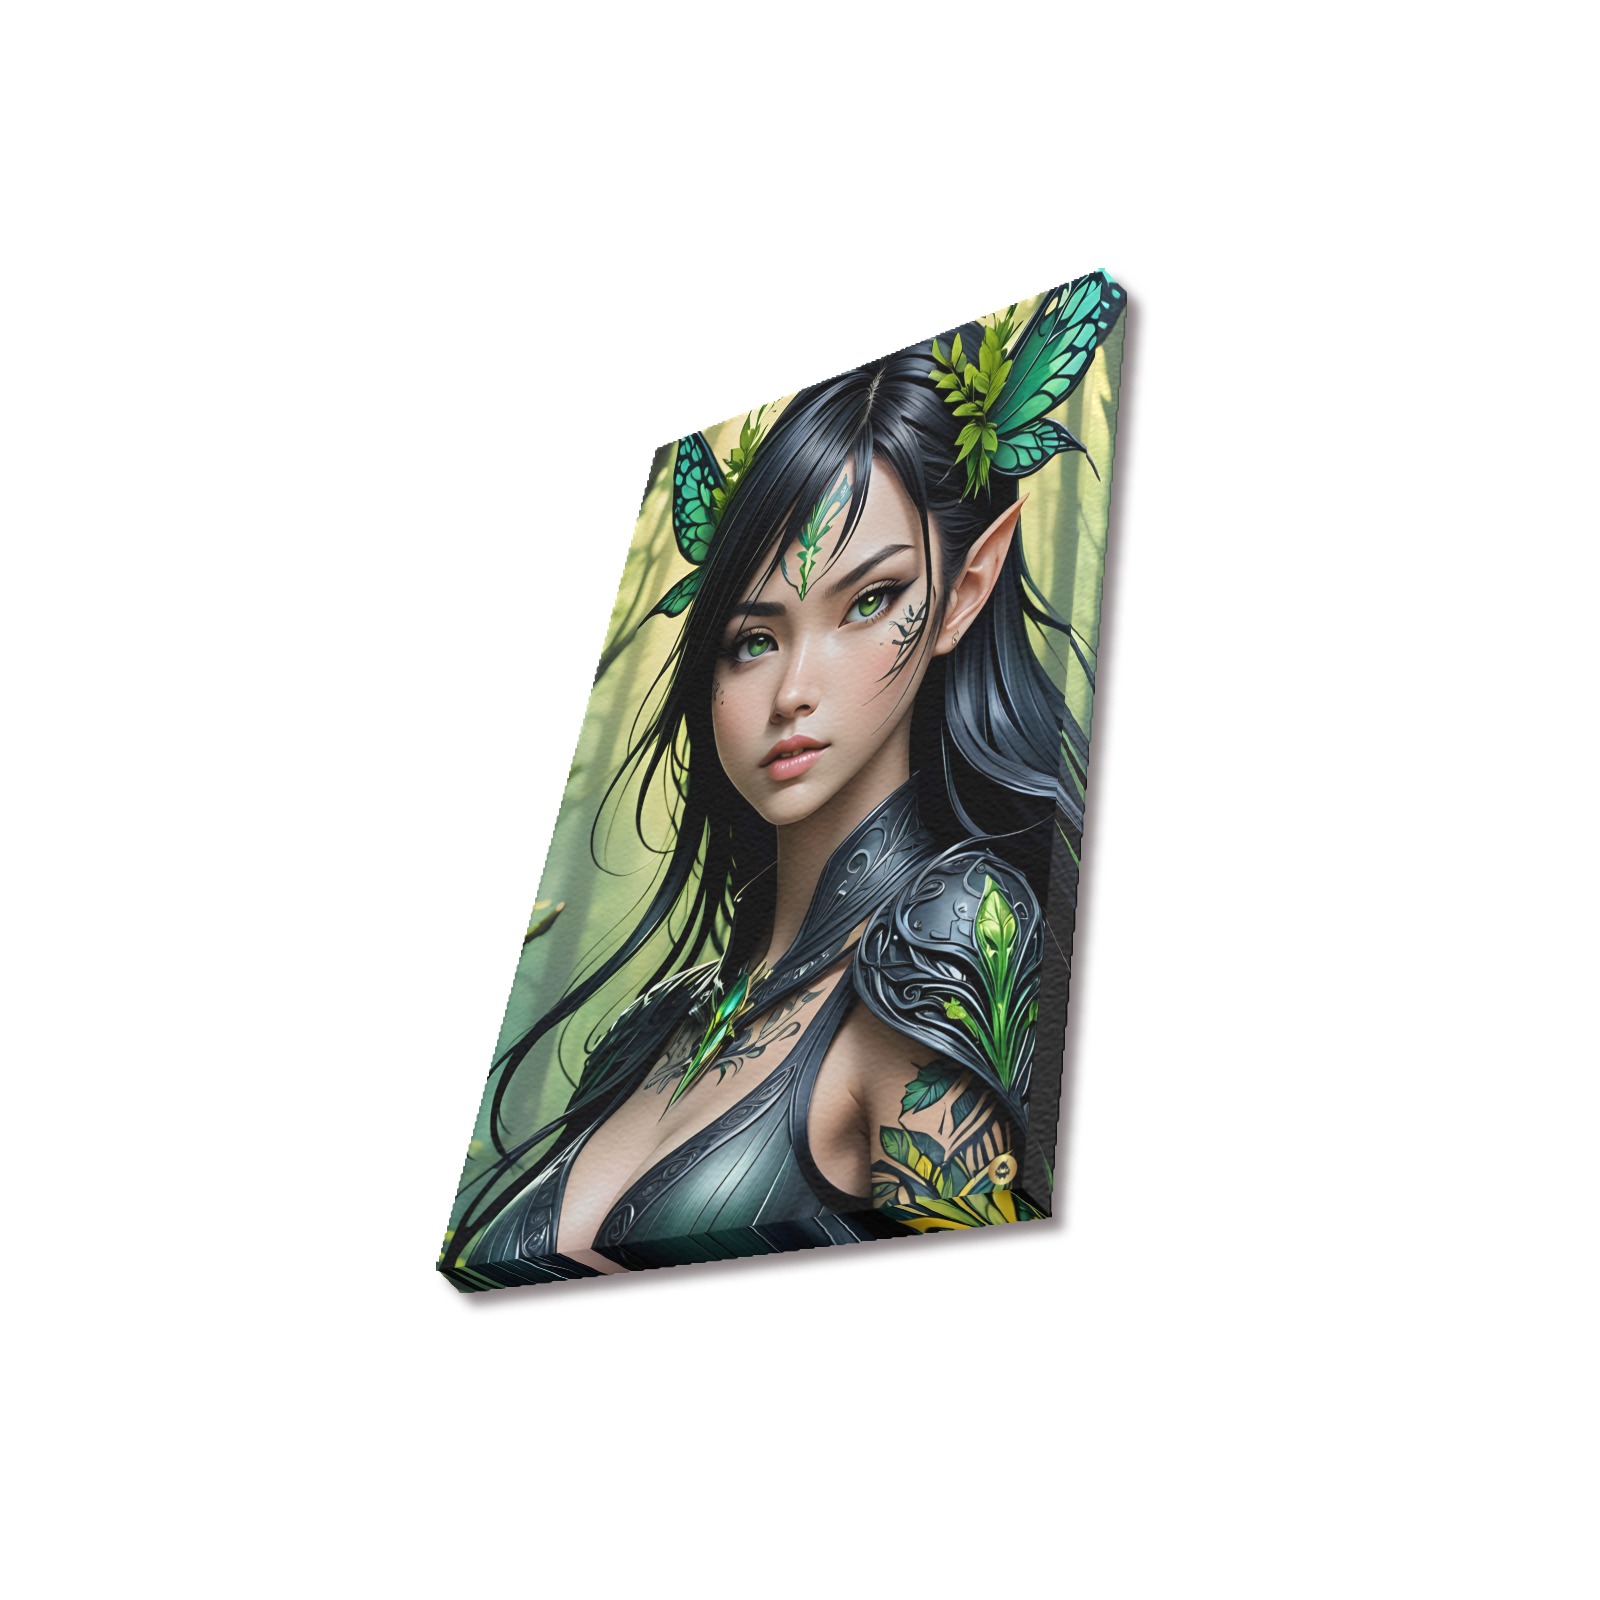 FOREST FAIRY - GREEN #1 Upgraded Canvas Print 12"x18"